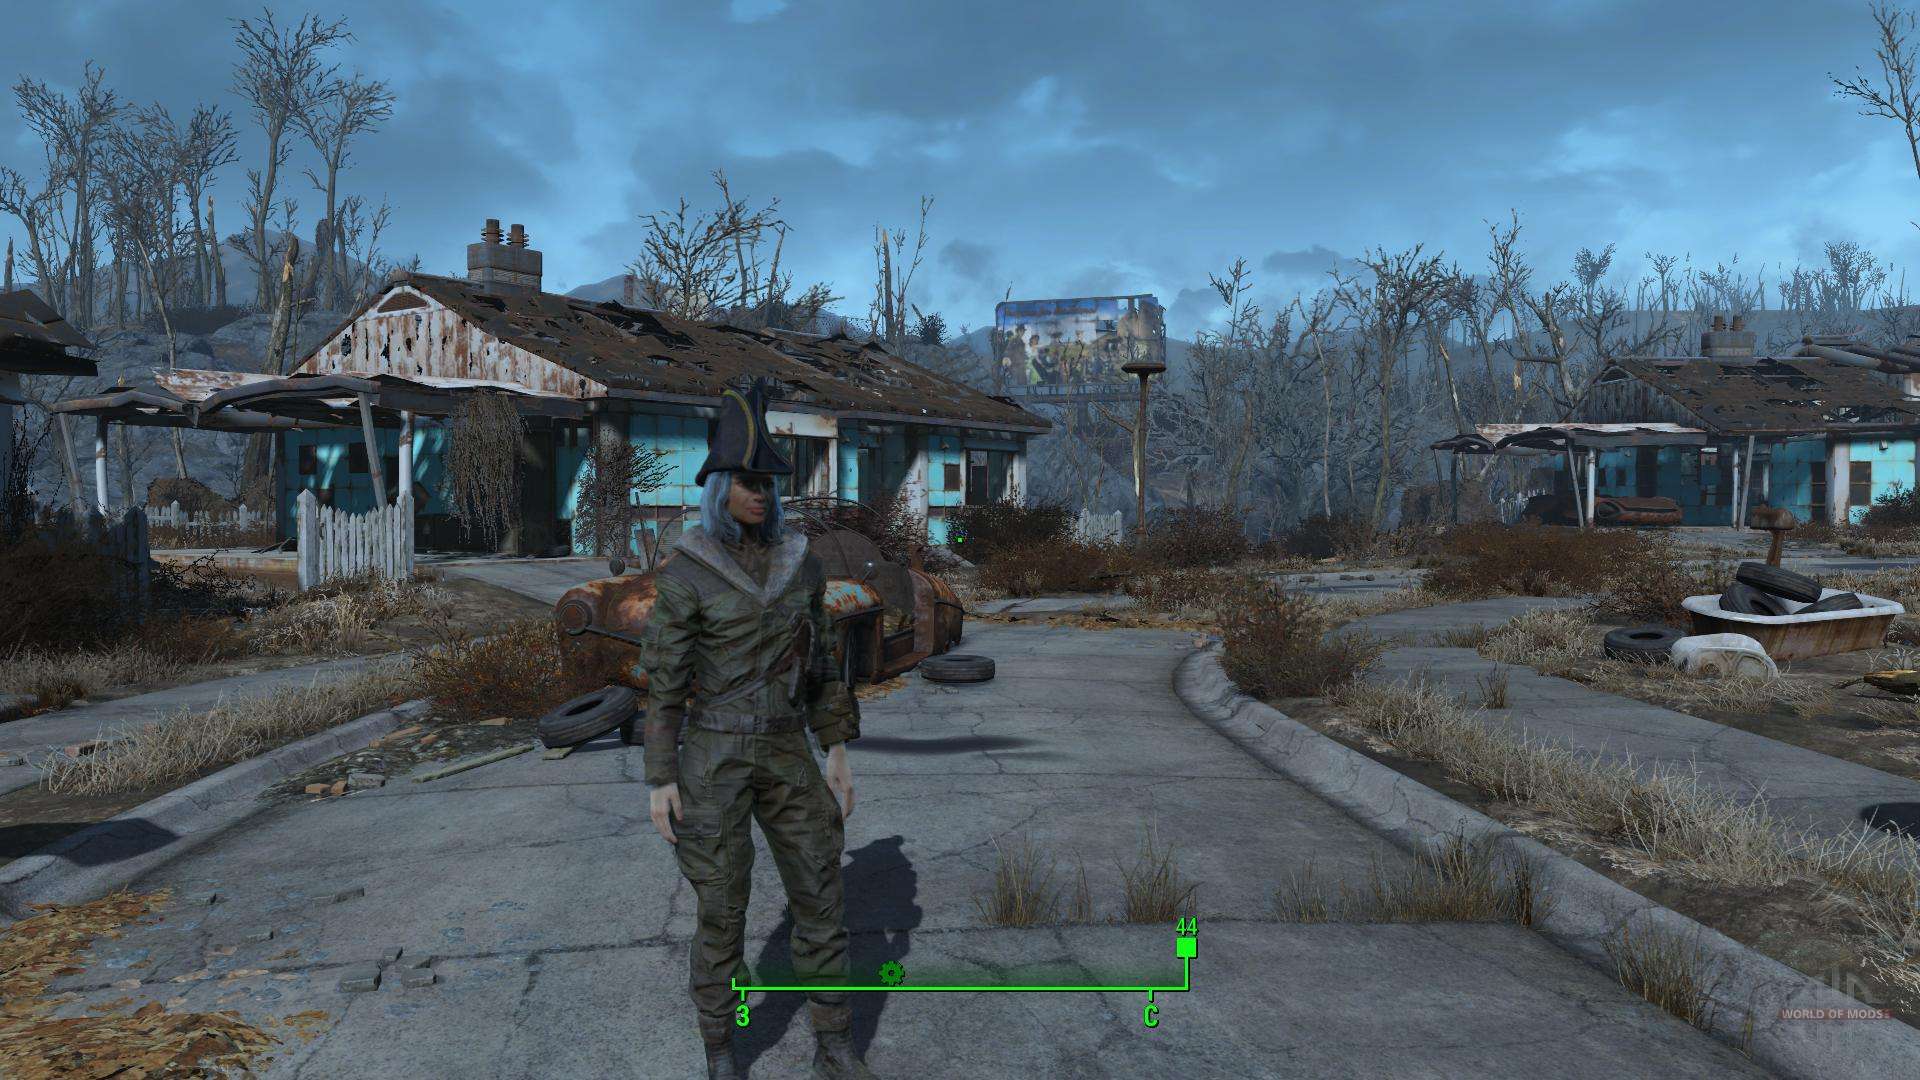 The combat zone fallout 4 фото 88